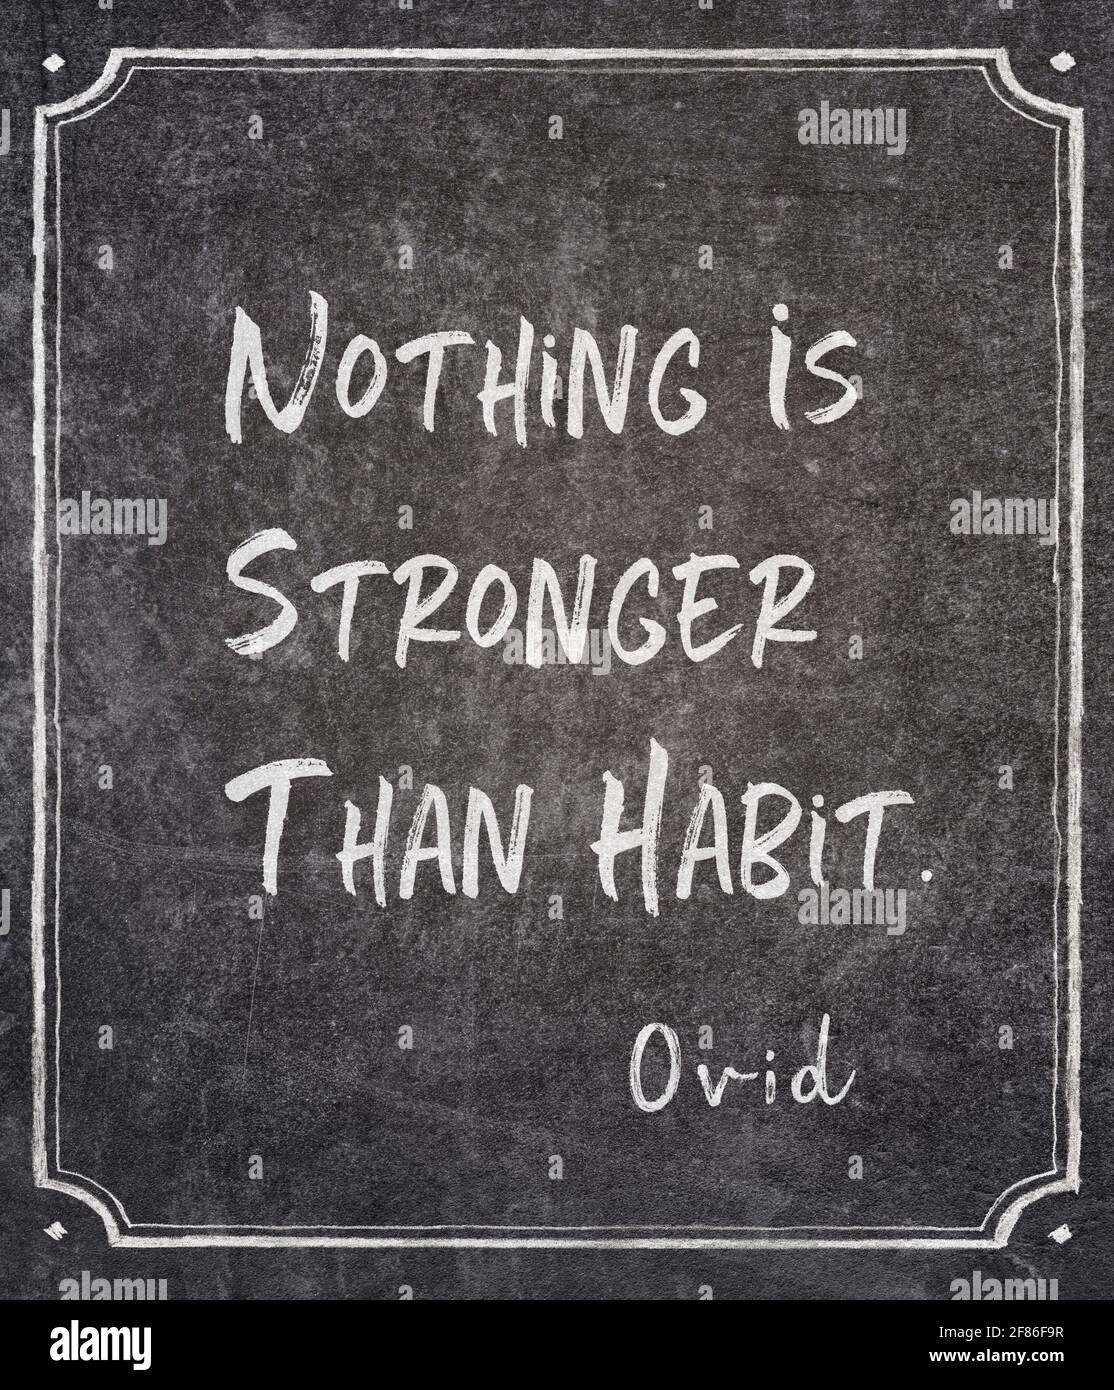 Nothing is stronger than habit - ancient Roman philosopher and poet Ovid quote written on framed chalkboard Stock Photo